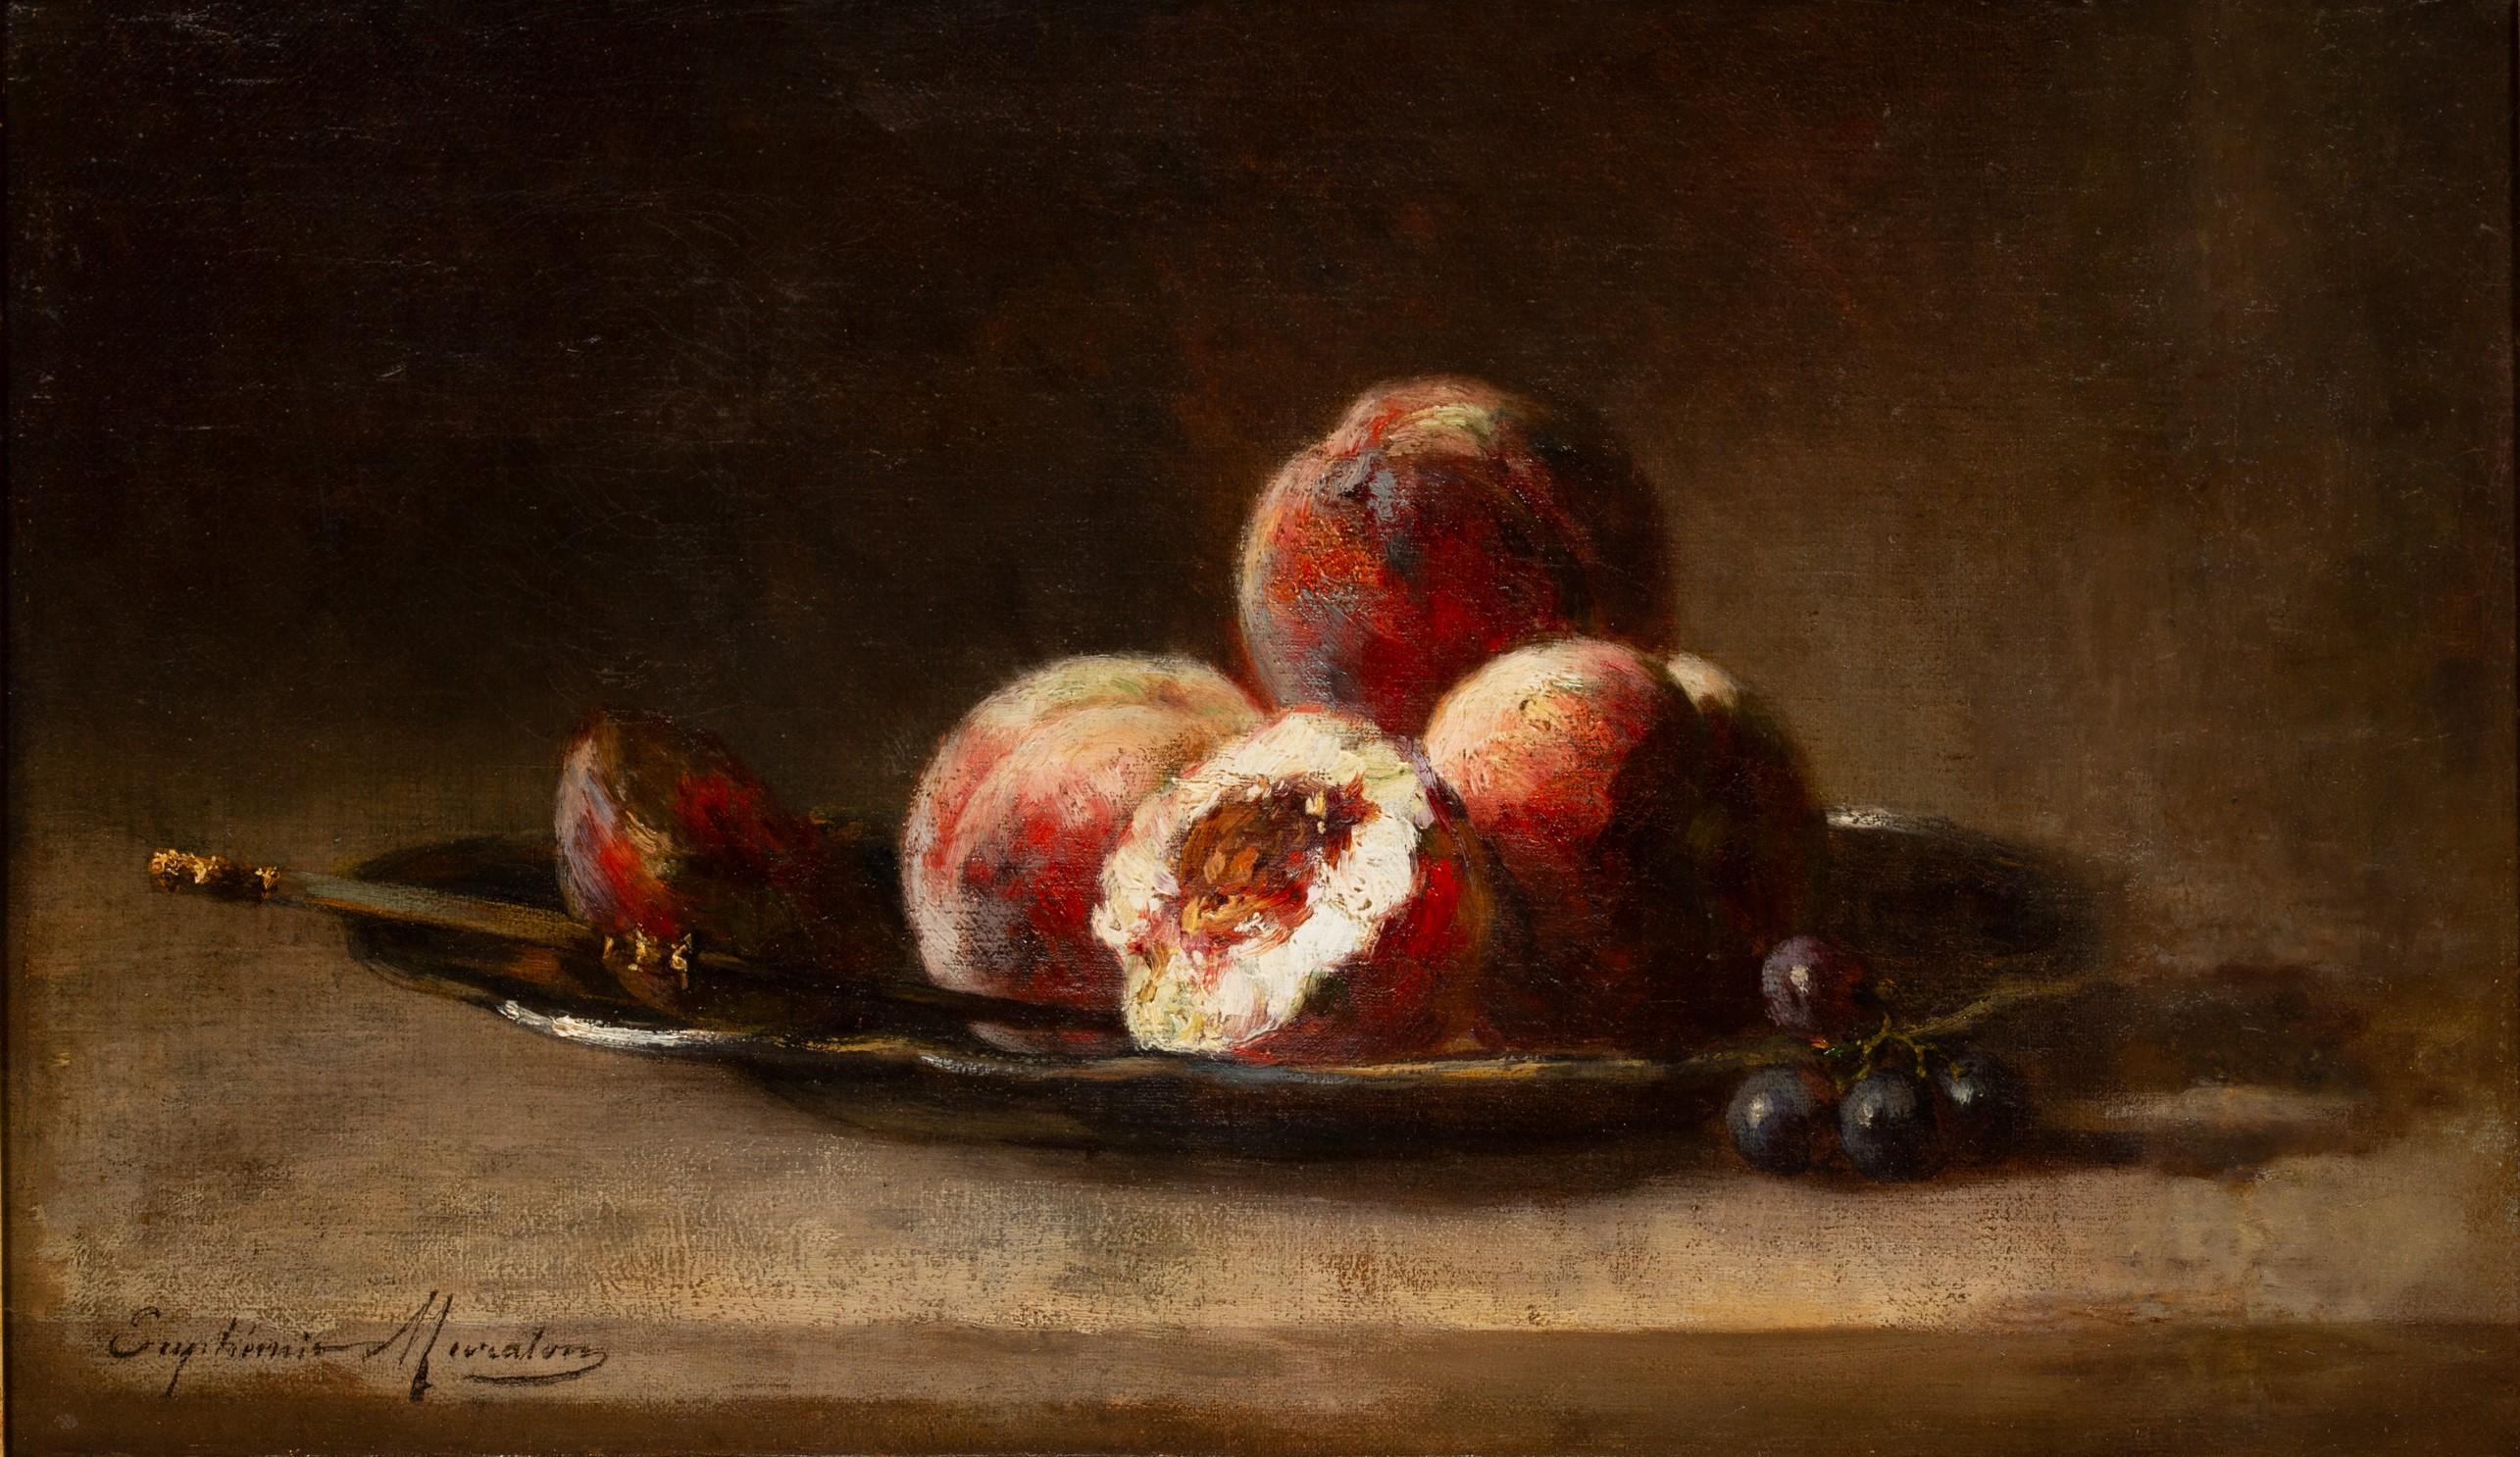 
Euphémie MURATON (1840-1914) STILL LIFE WITH FRUITS Oil on canvas signed lower left 29 x 48 cm
Period frame

Born Camille Euphémie Duhanot, in 1854 she married the painter Alphonse Muraton, of whom she was a student.
She began at the Salon of 1868